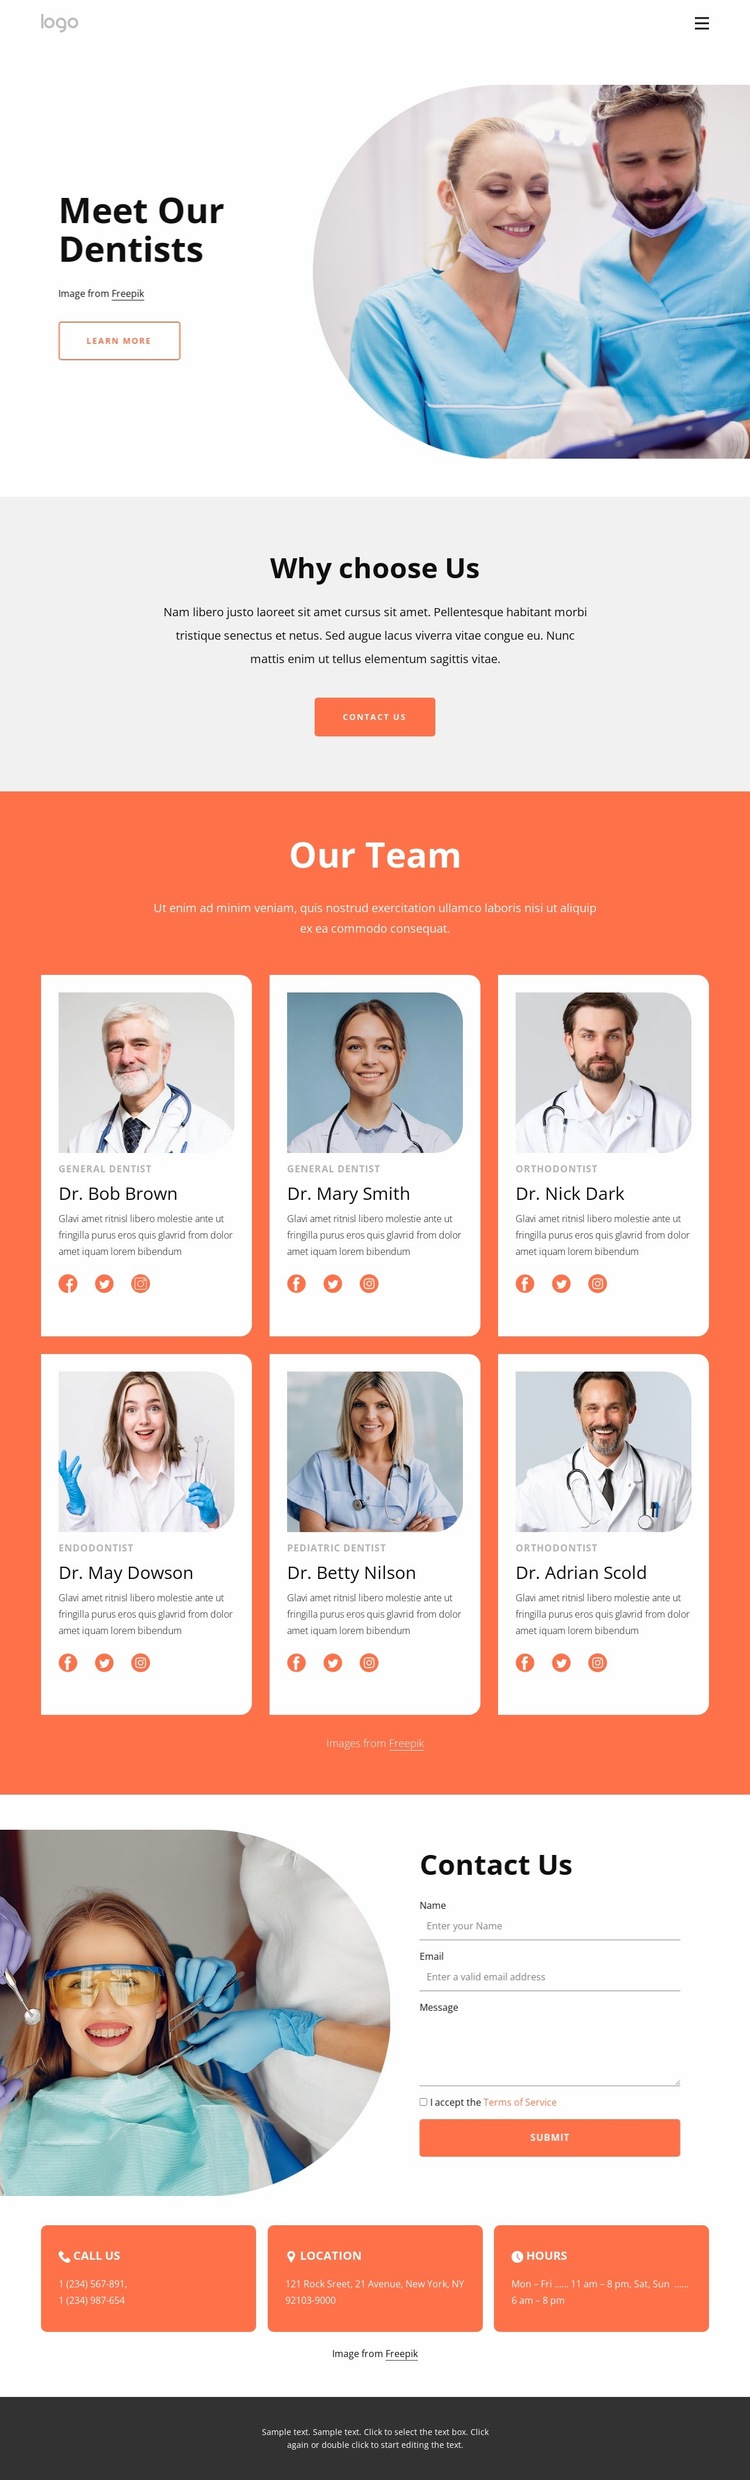 Highly-qualified dentists Website Builder Templates